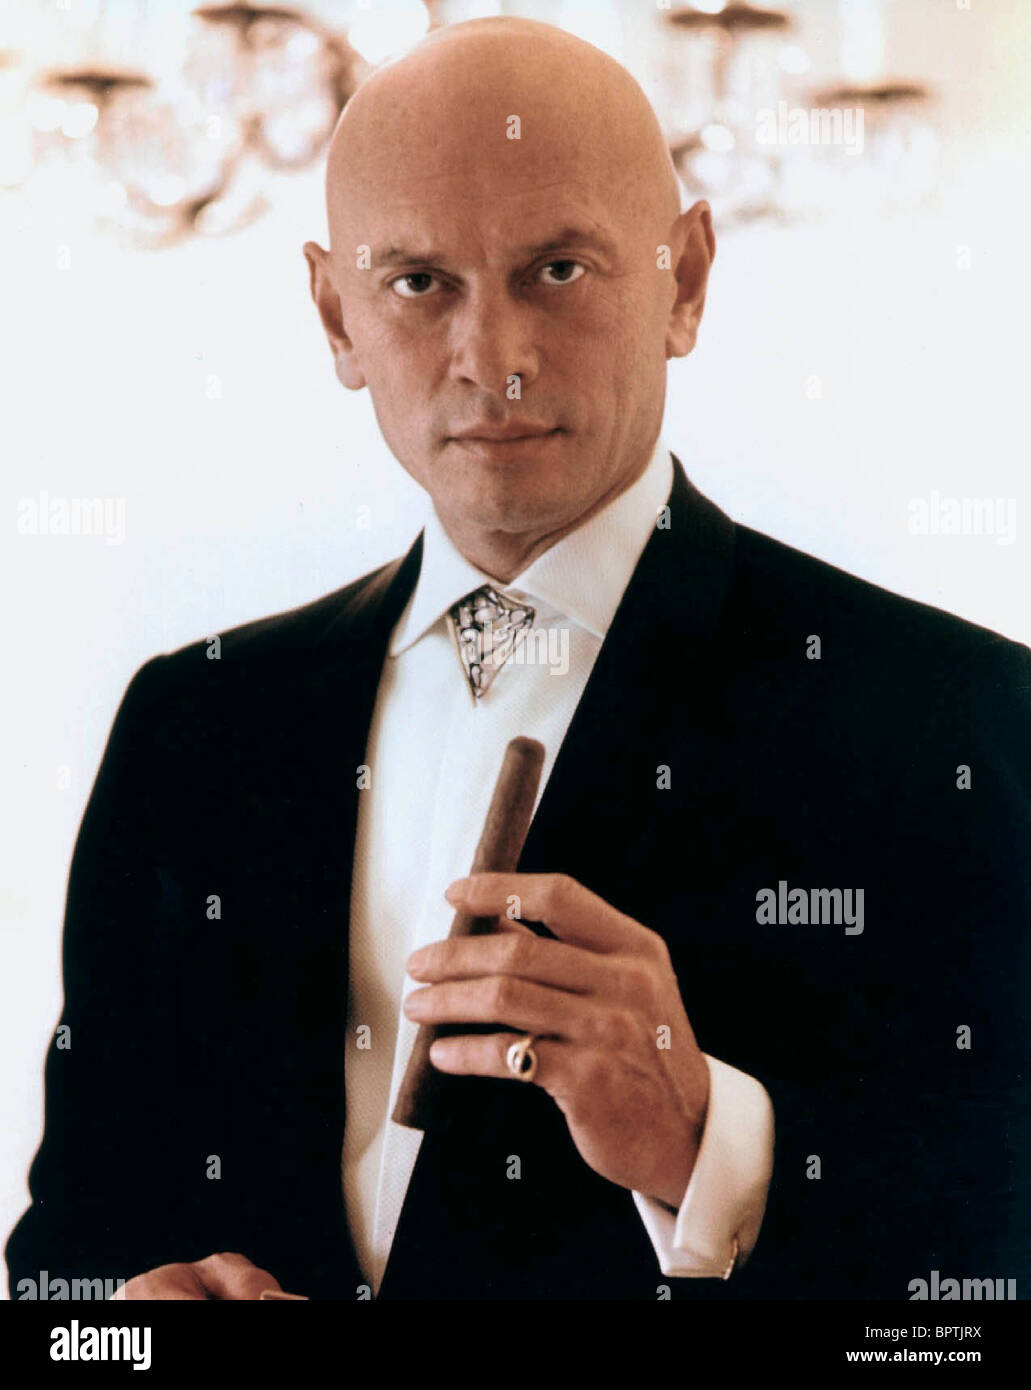 YUL BRYNNER ACTOR (1960) Stock Photo